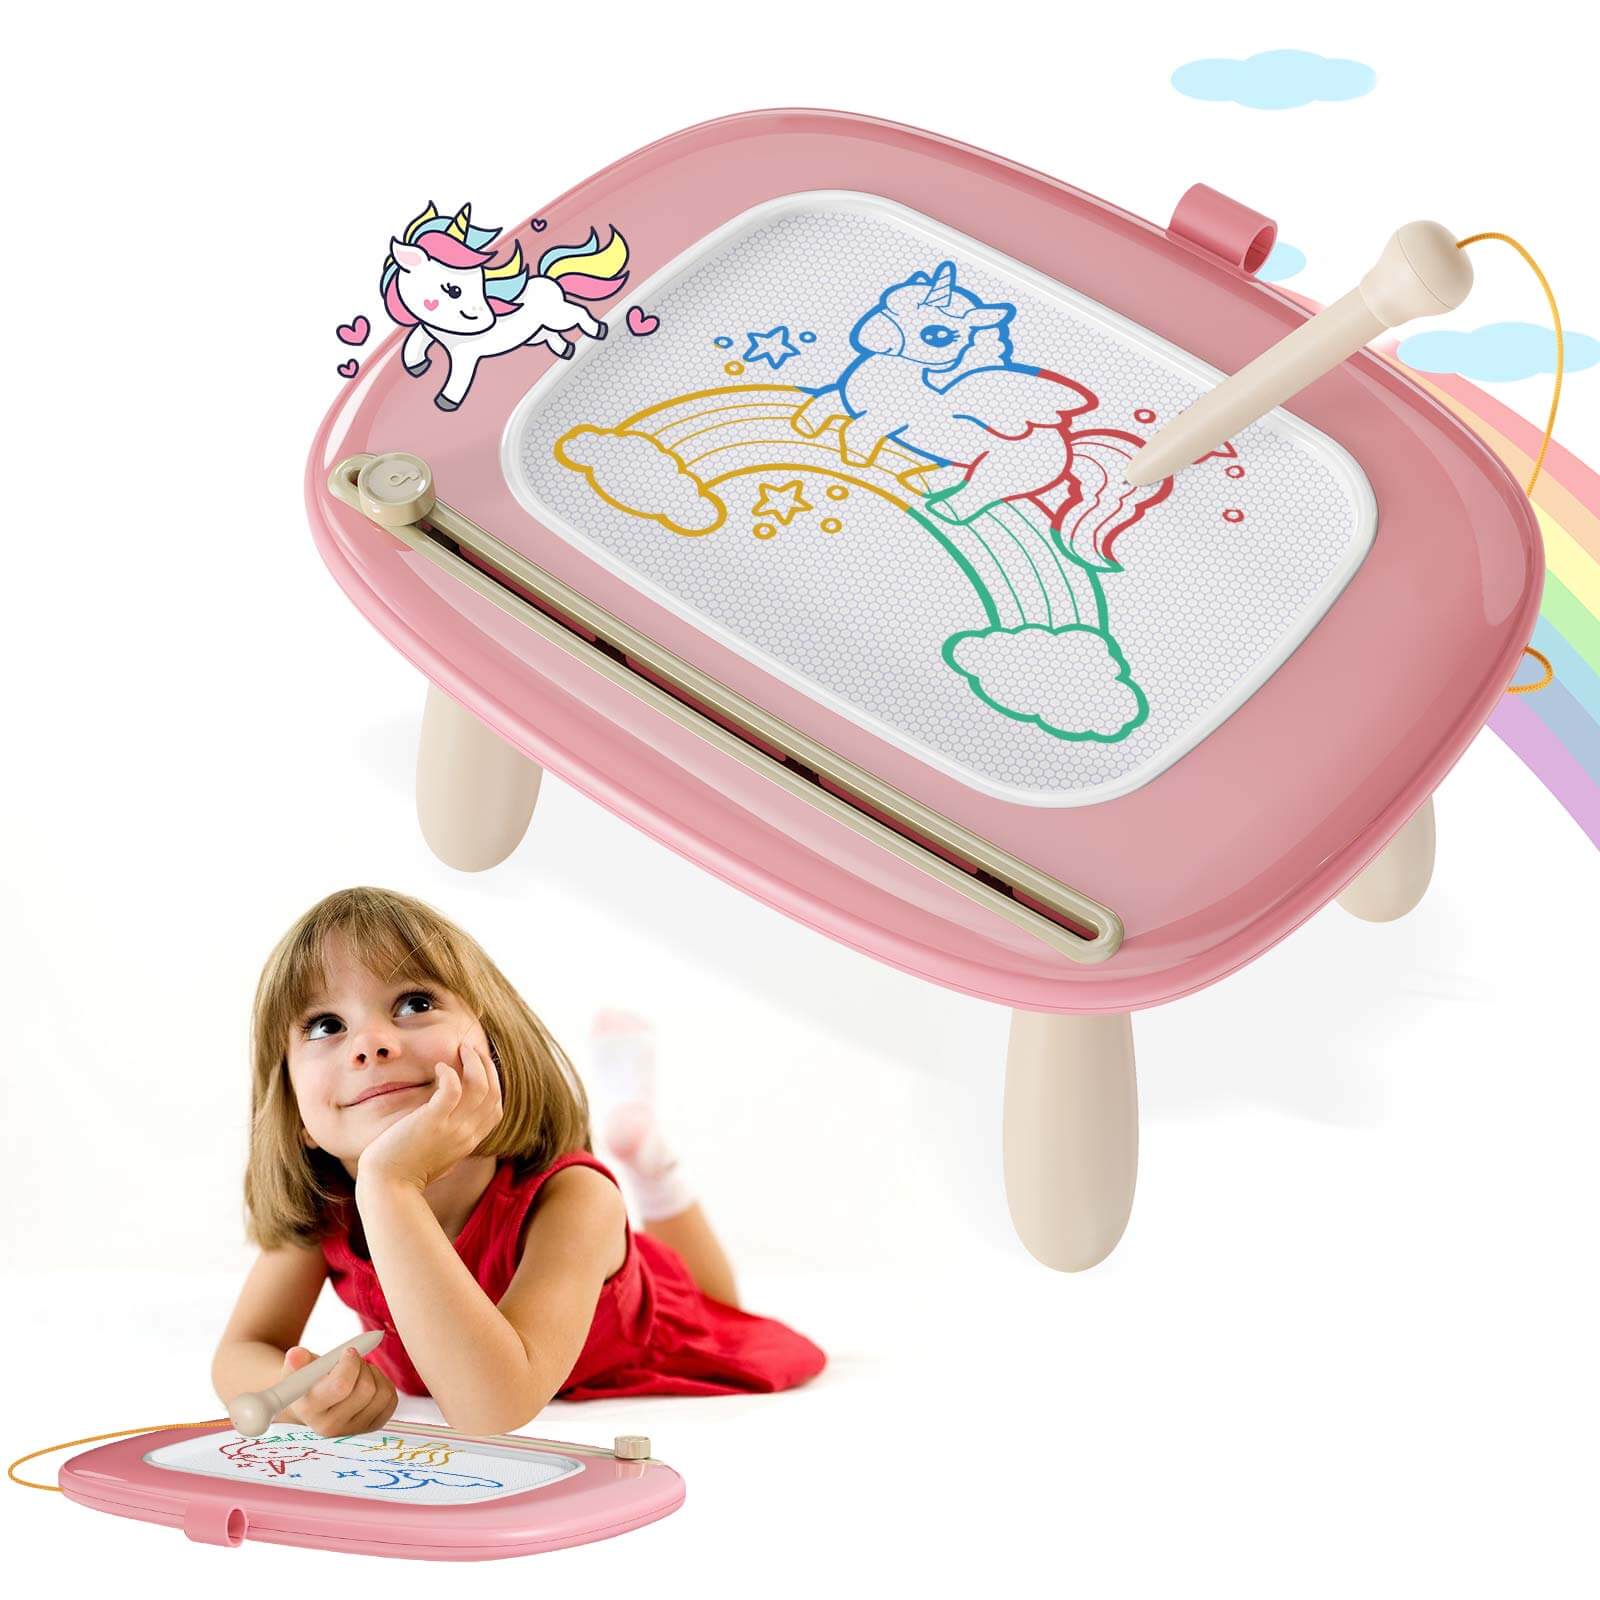 Kikidex Toddlers Toys Age 1-3, Magnetic Drawing Board, Toddler Girl Toys for 1-2 Year Old, Doodle Board Pad Learning and Educati